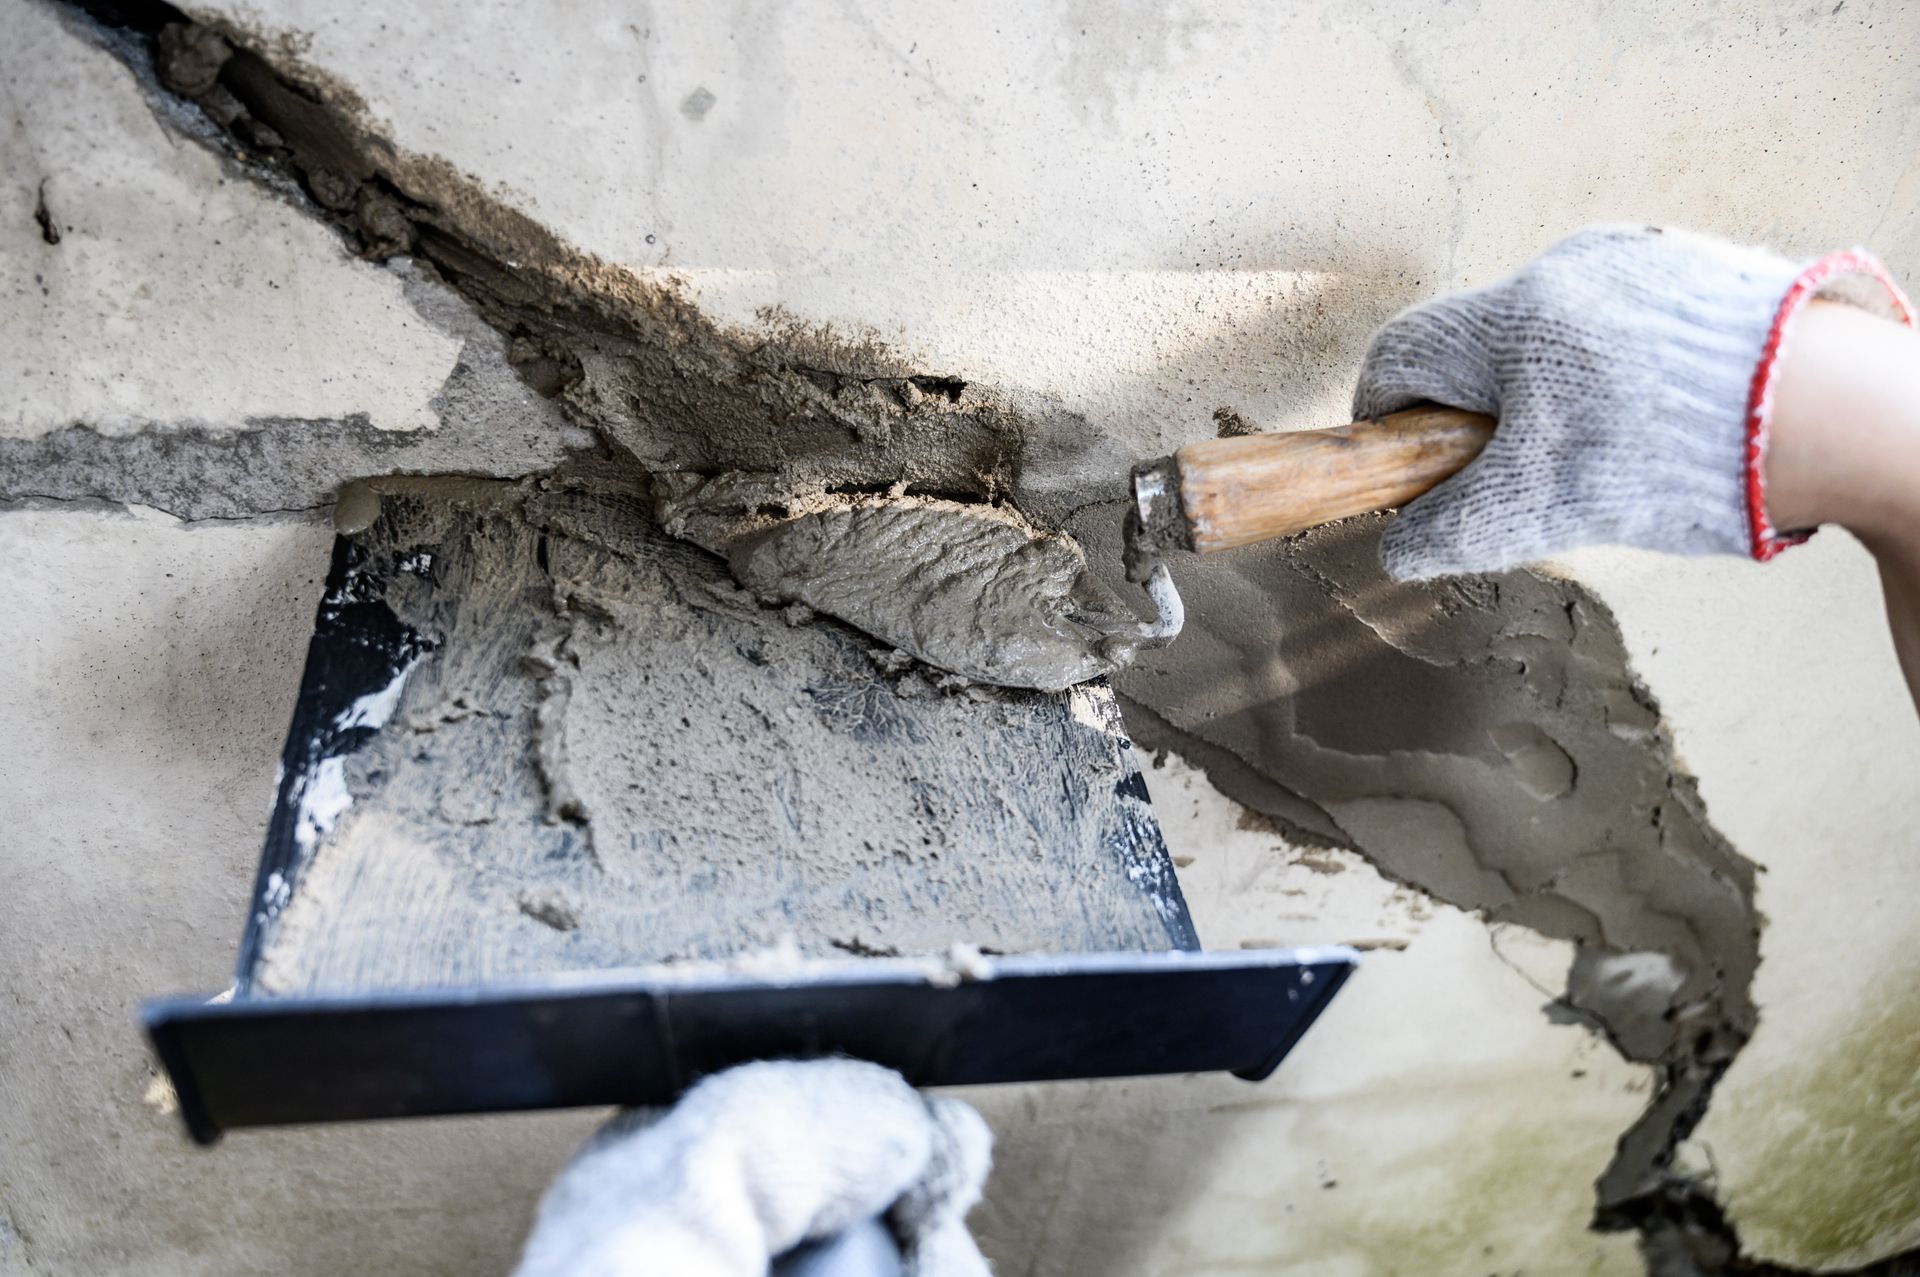 A person is using a trowel to spread cement on a wall.